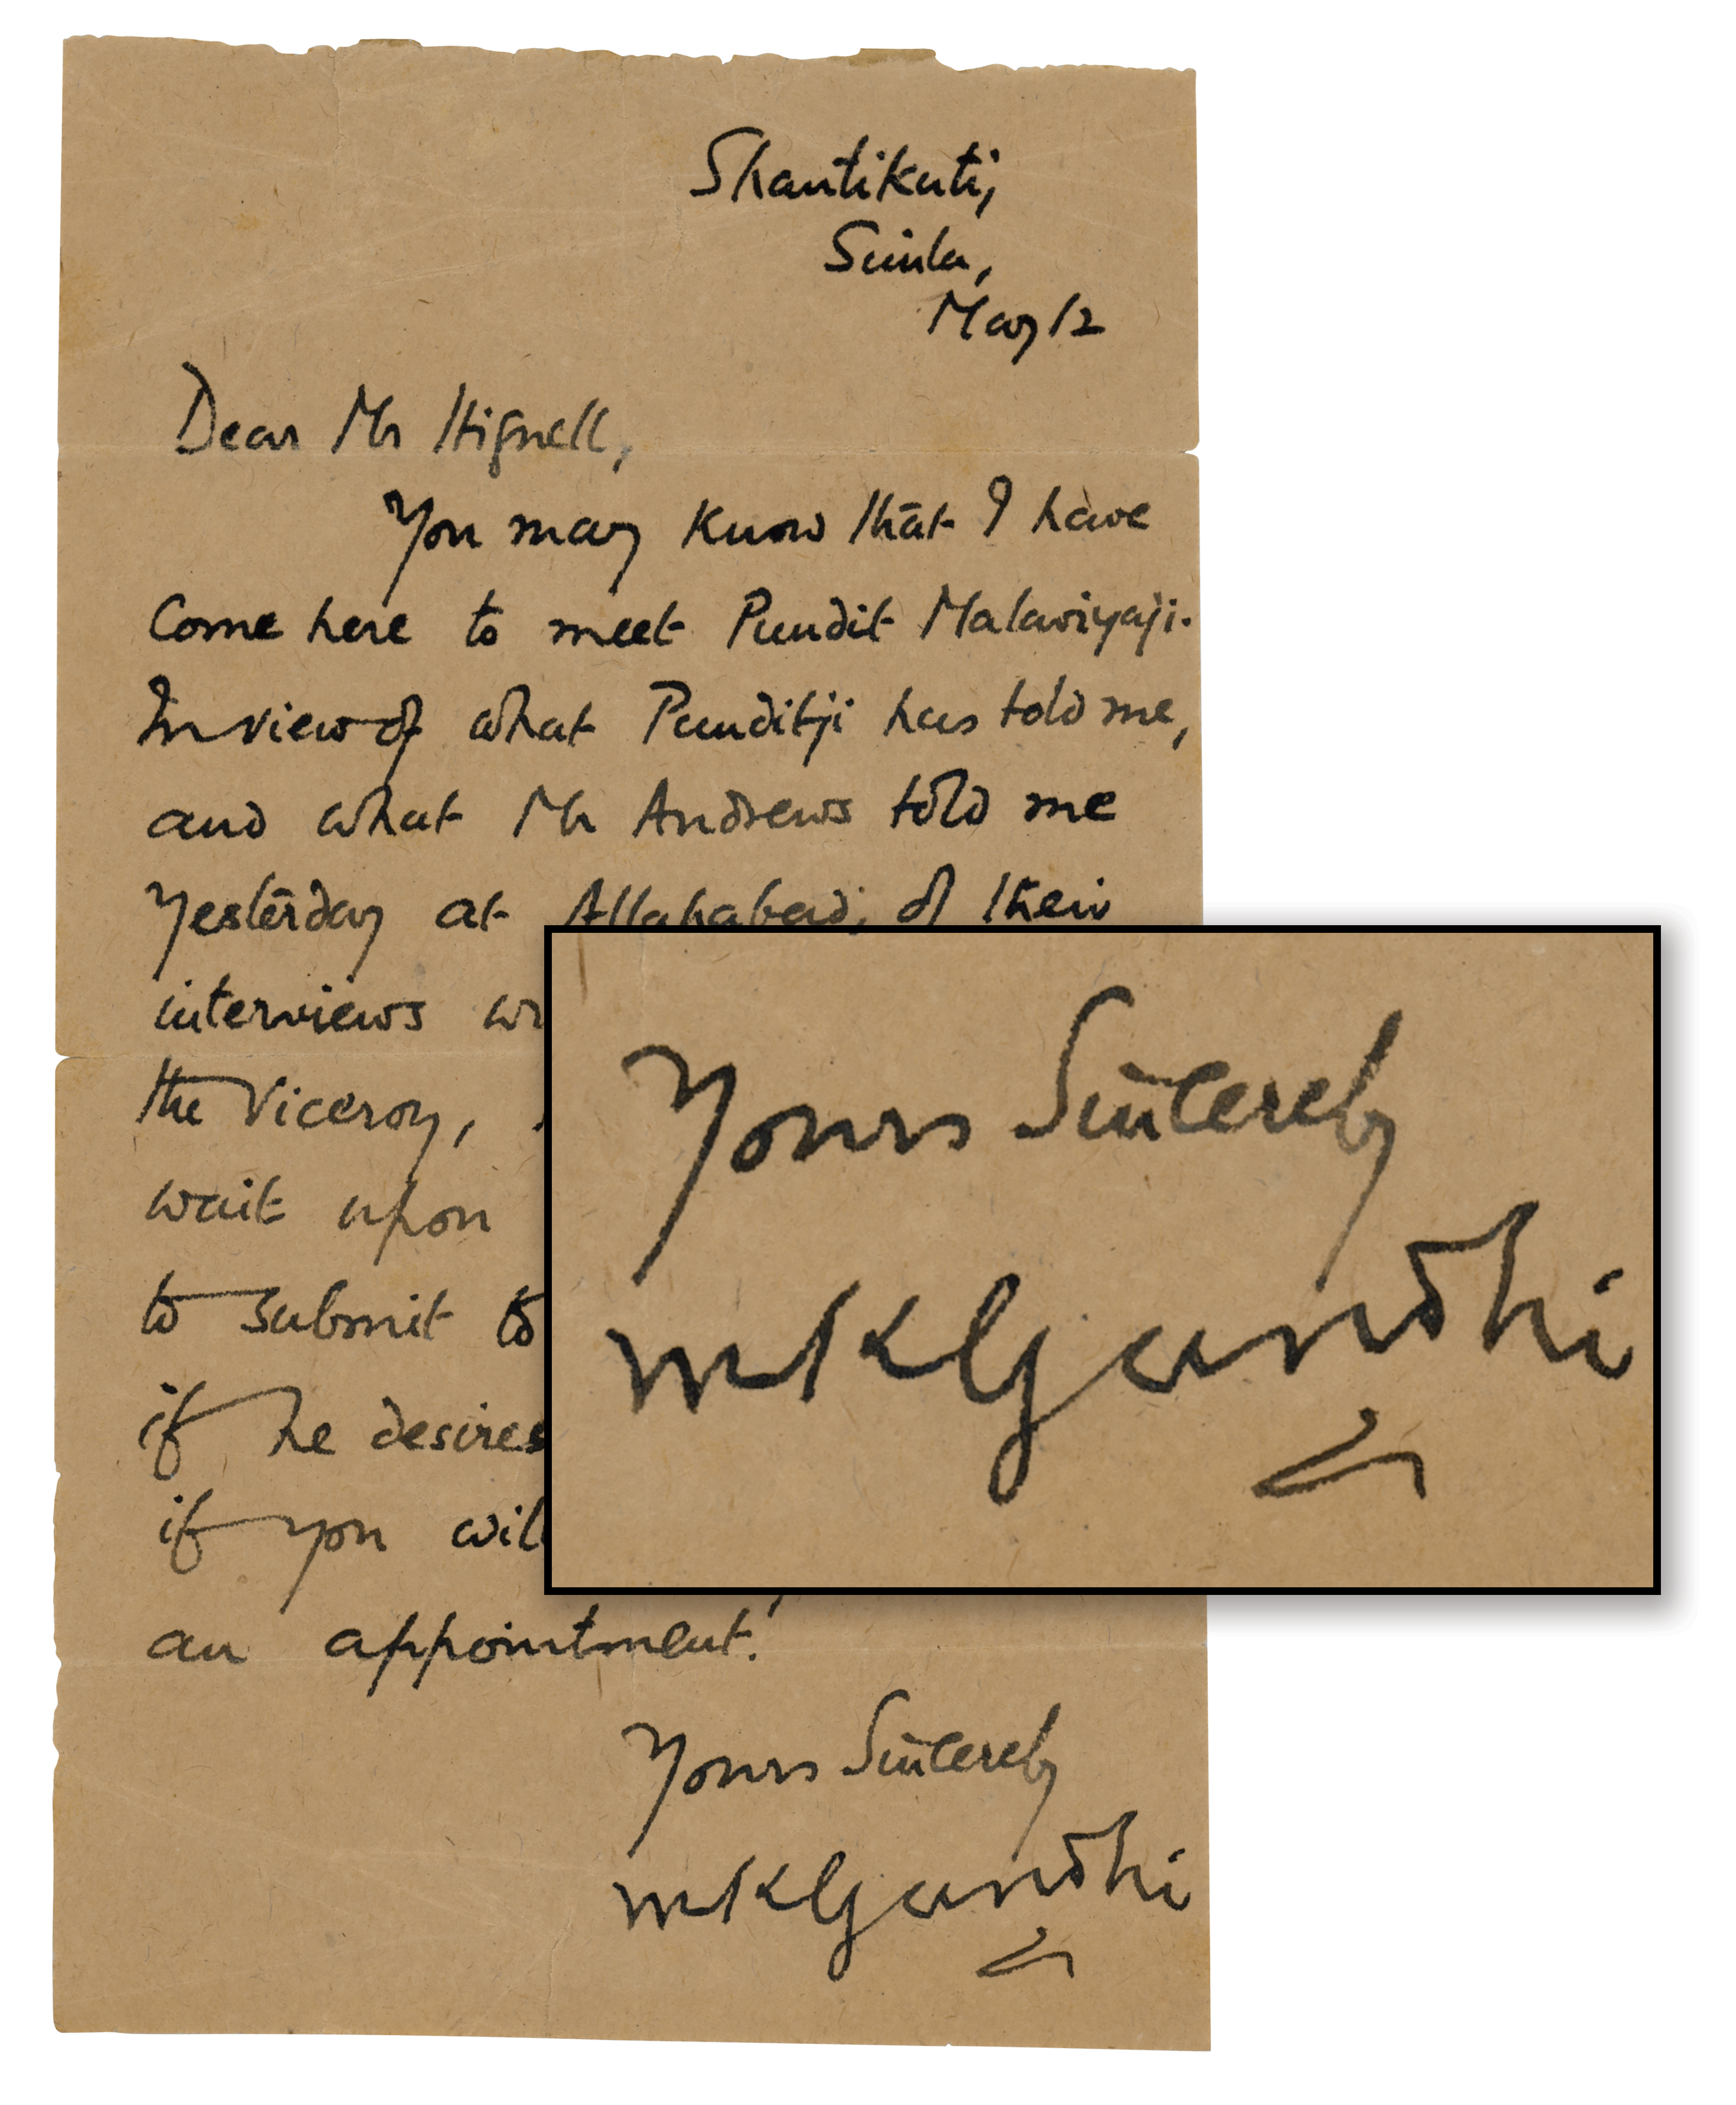 Lot #80 Mohandas Gandhi Letter Signed on His 1921 Meeting with the Viceroy of India - Image 1